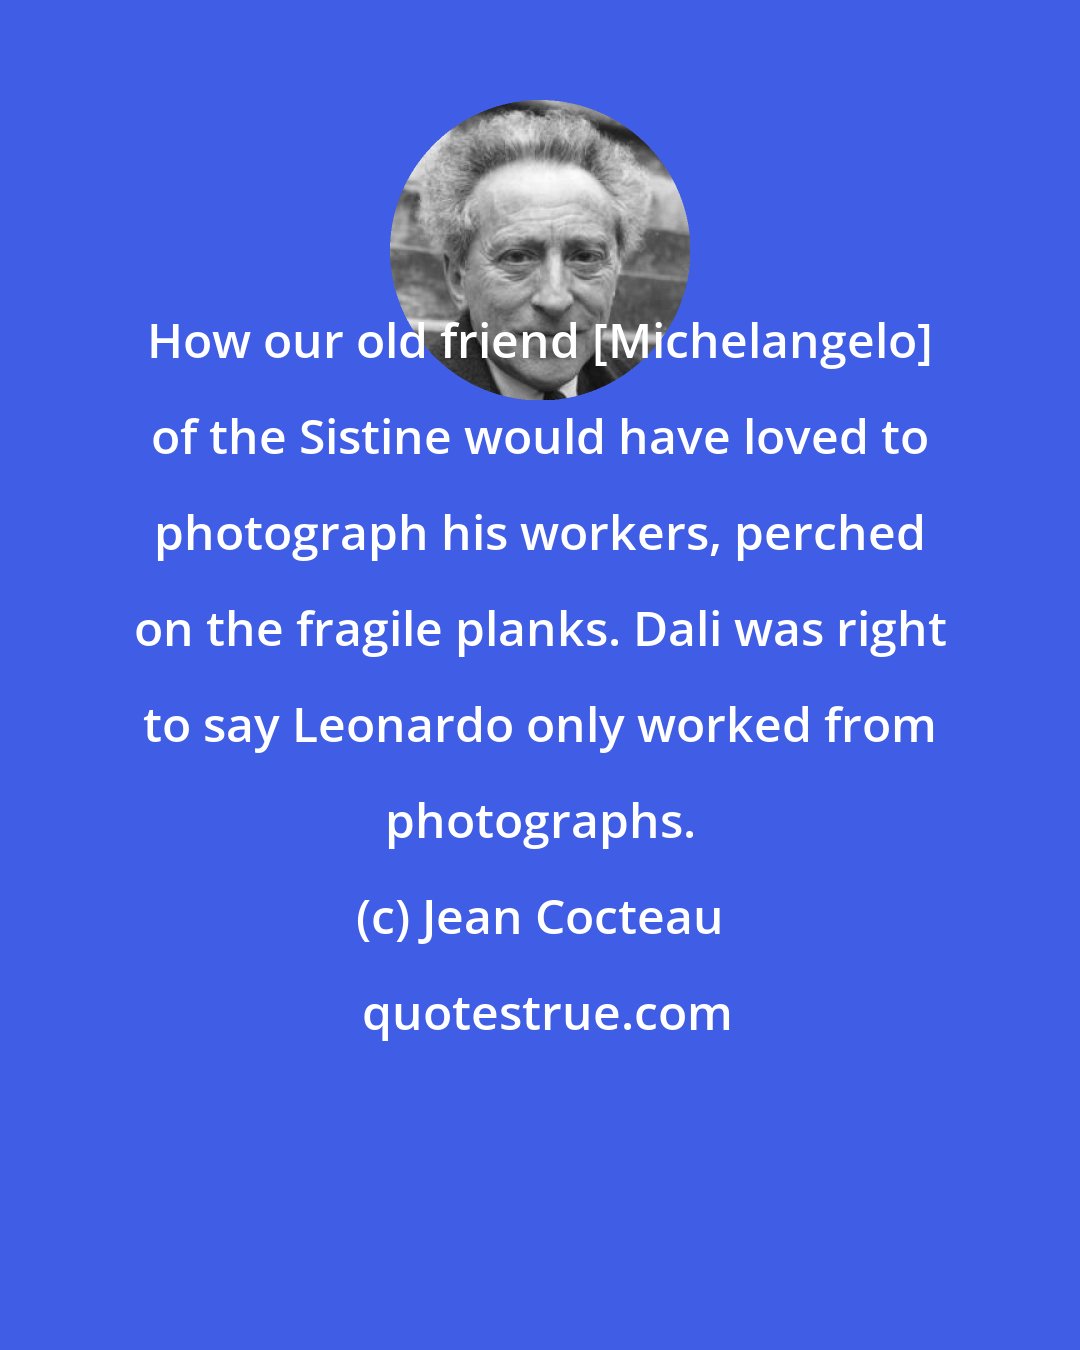 Jean Cocteau: How our old friend [Michelangelo] of the Sistine would have loved to photograph his workers, perched on the fragile planks. Dali was right to say Leonardo only worked from photographs.